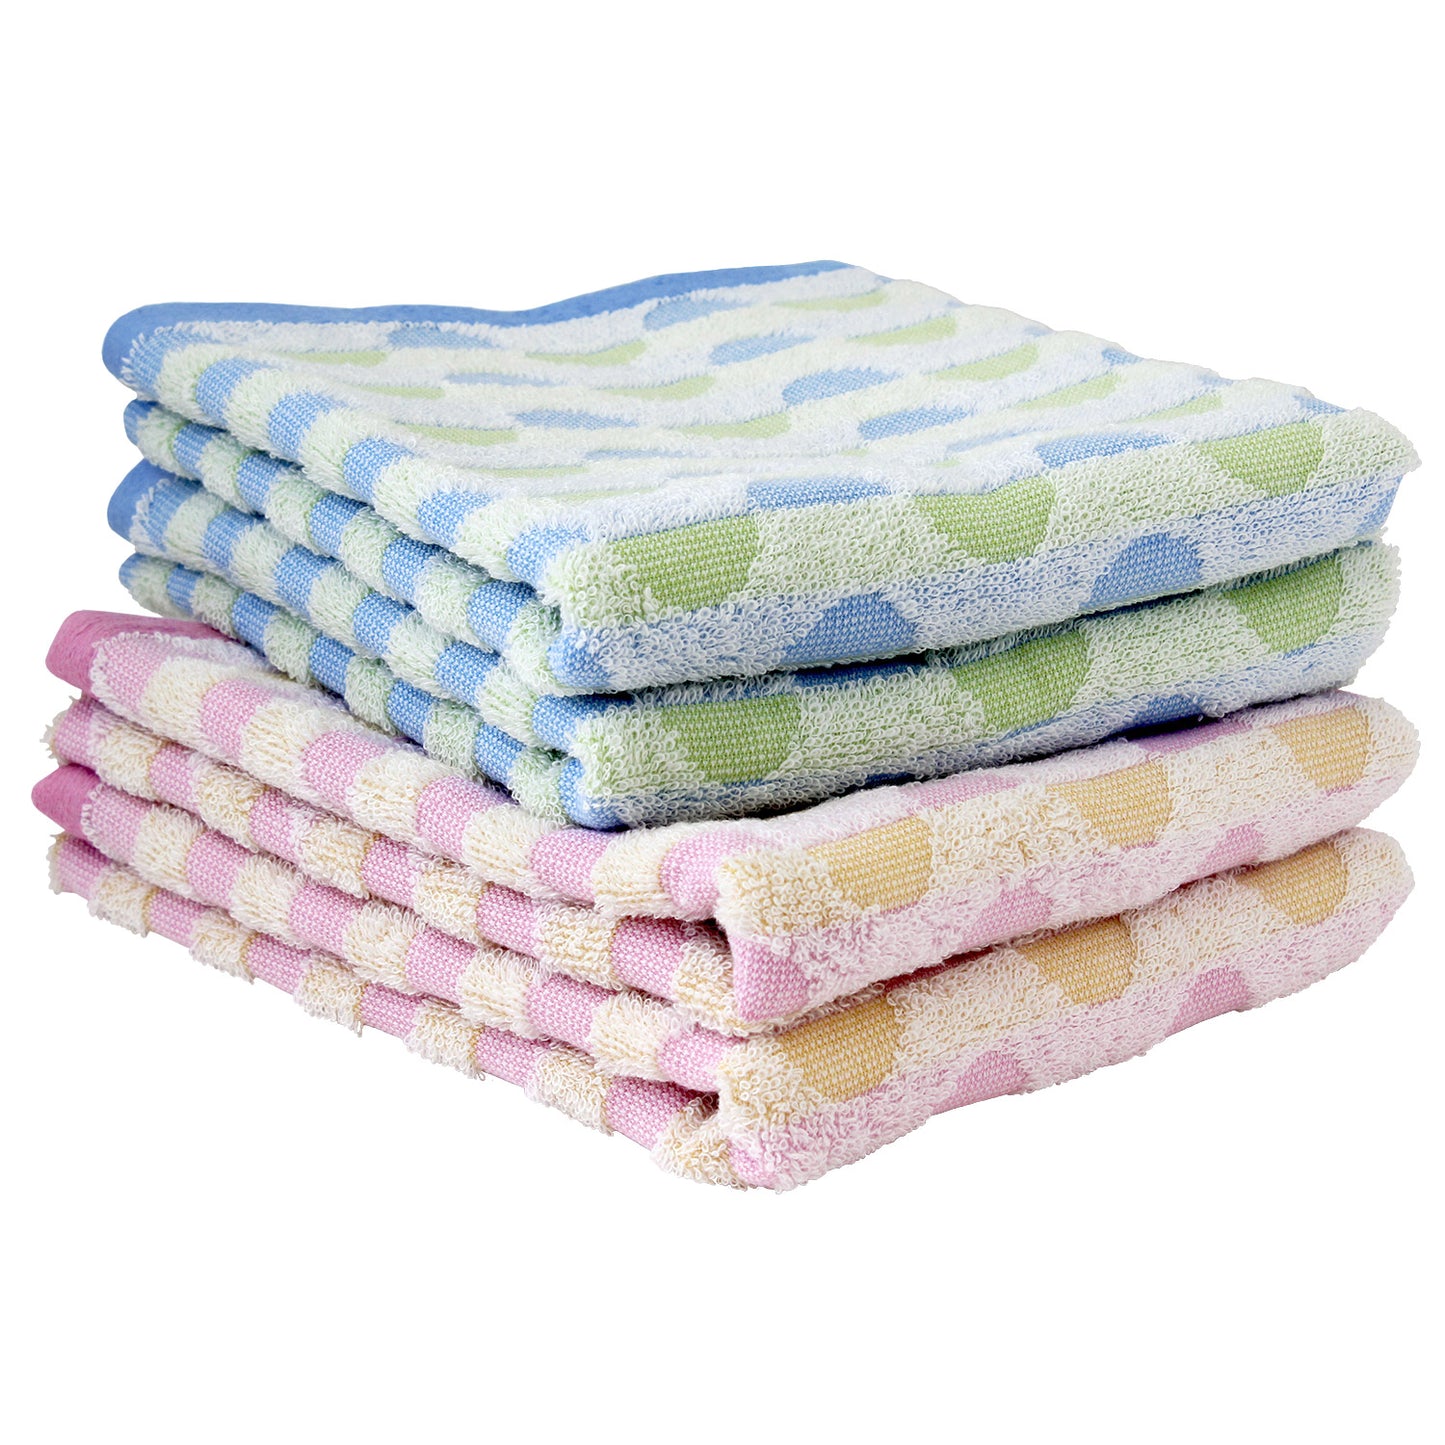 Hiorie Imabari Caribbean Water-Absorption Fast Drying Face Towel cotton Japan